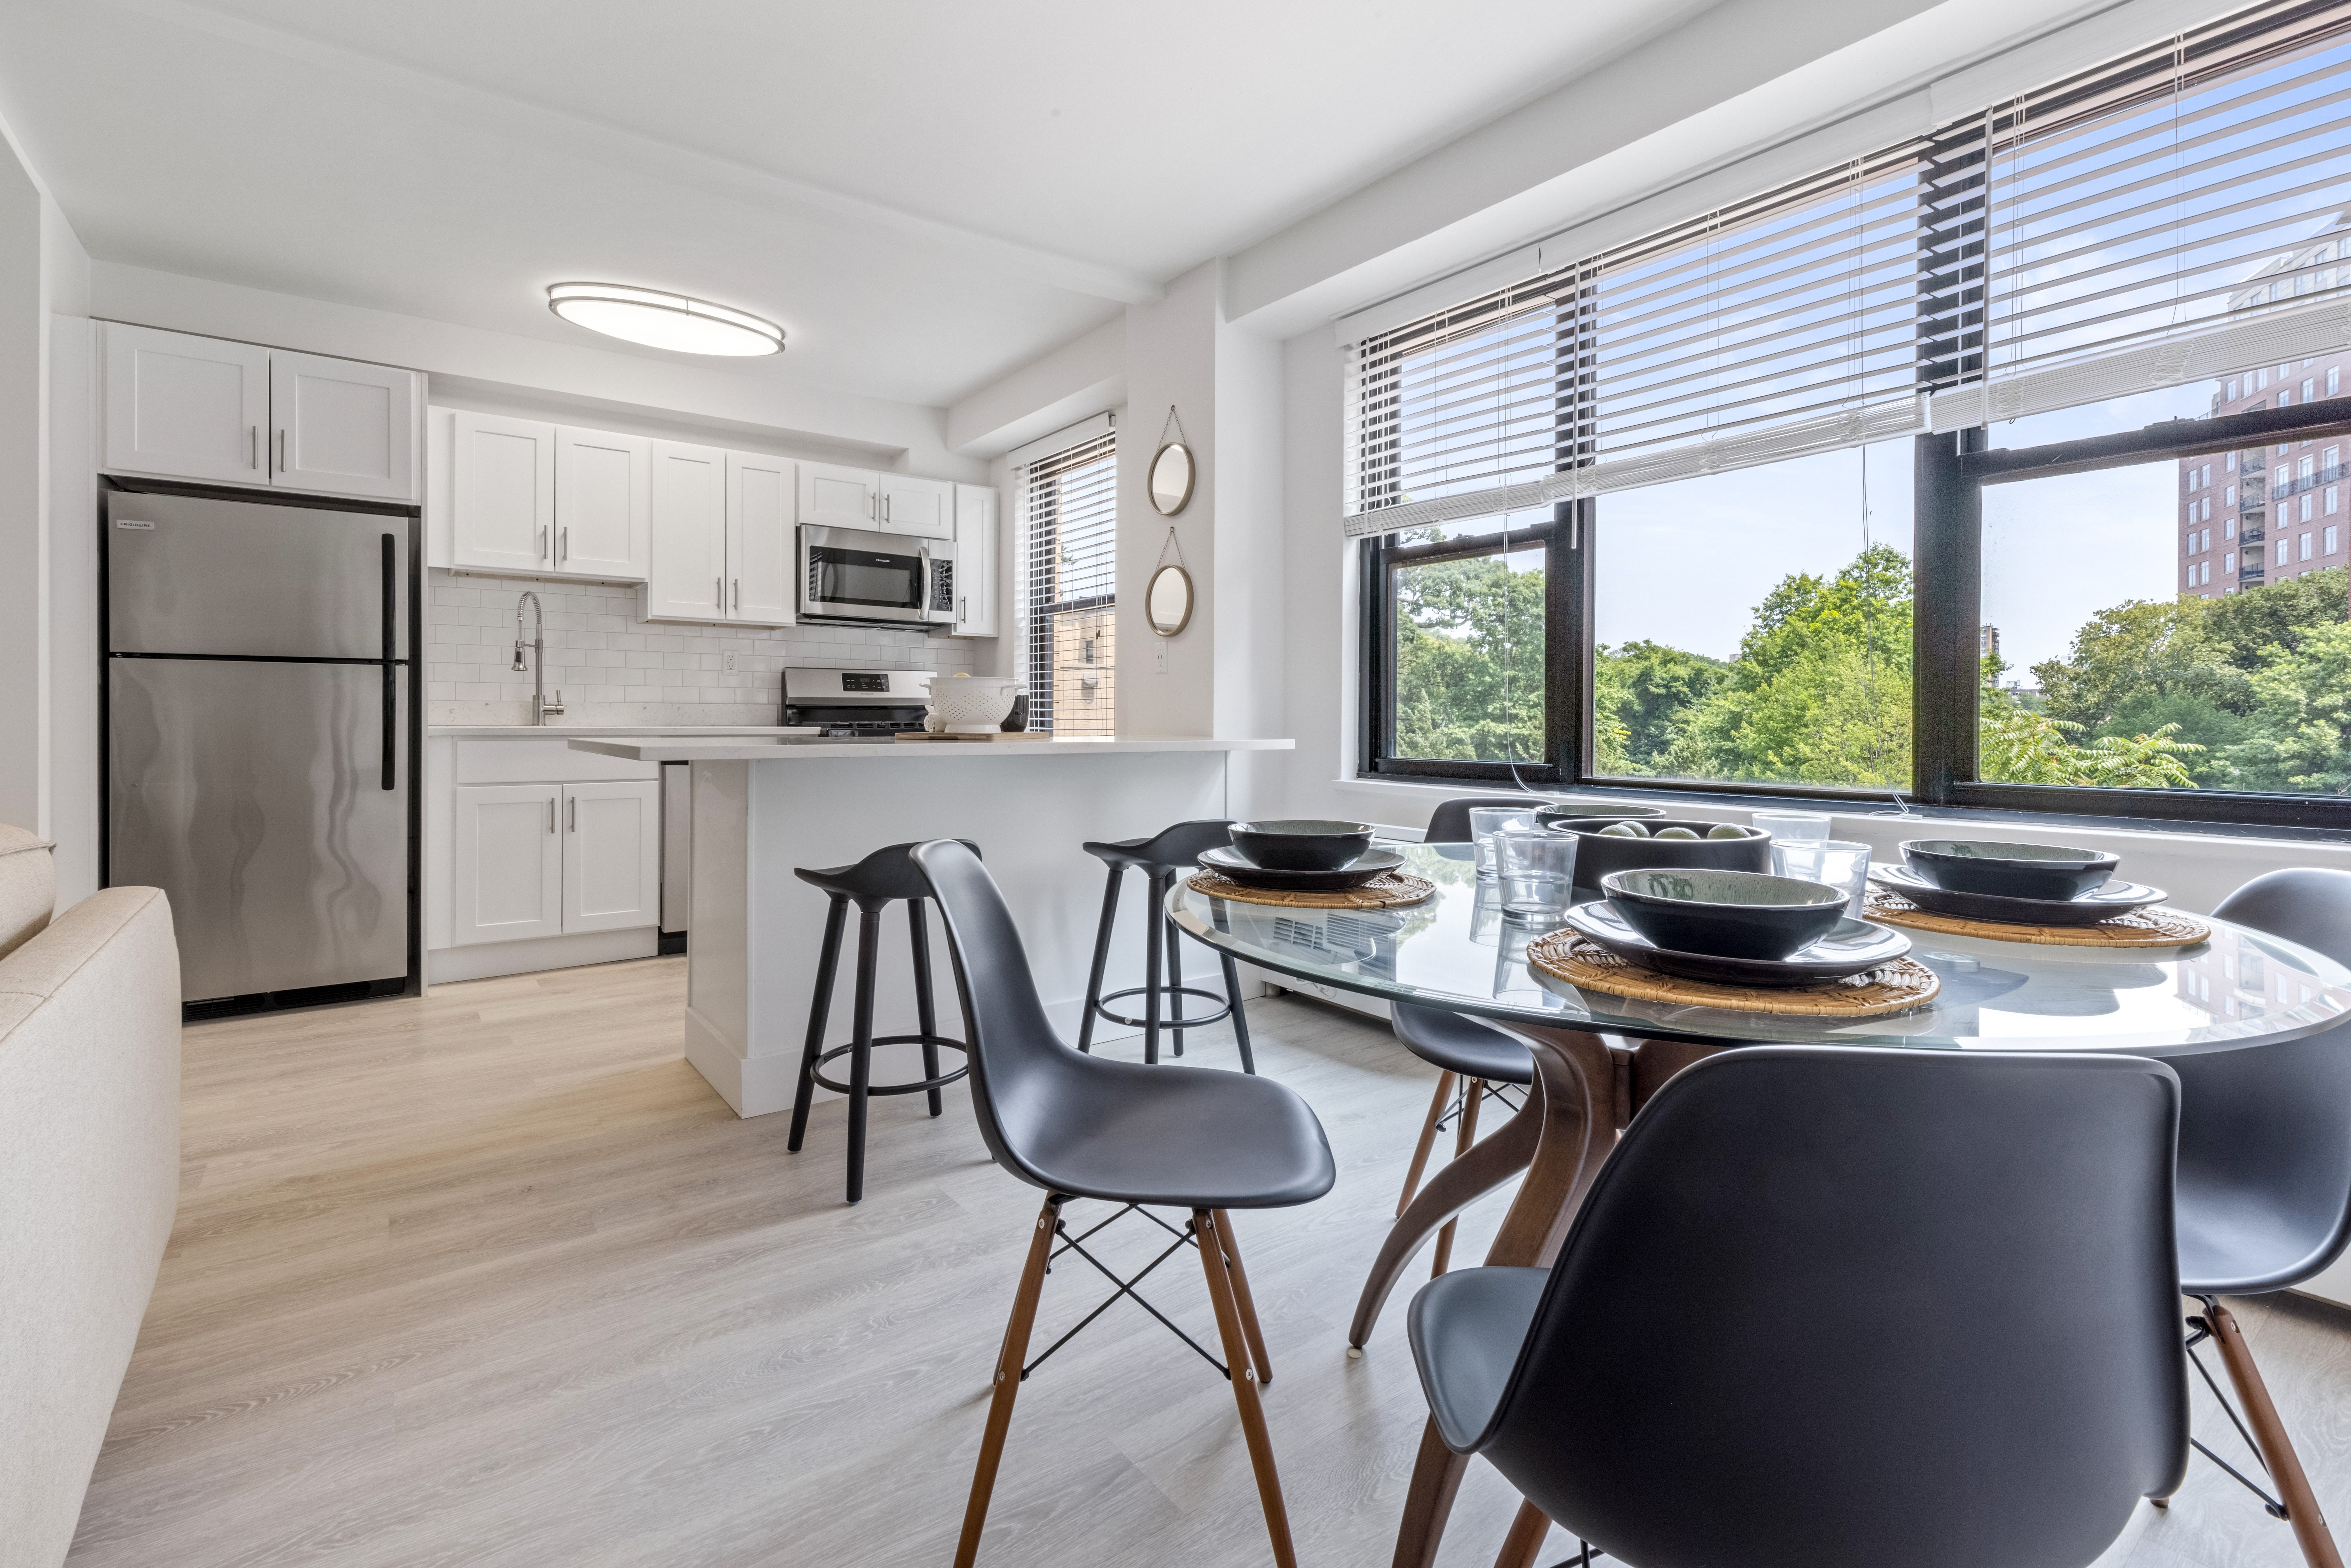 203 Living - rental apartment eat-in kitchen and dining at Prospect Park in Southern Connecticut